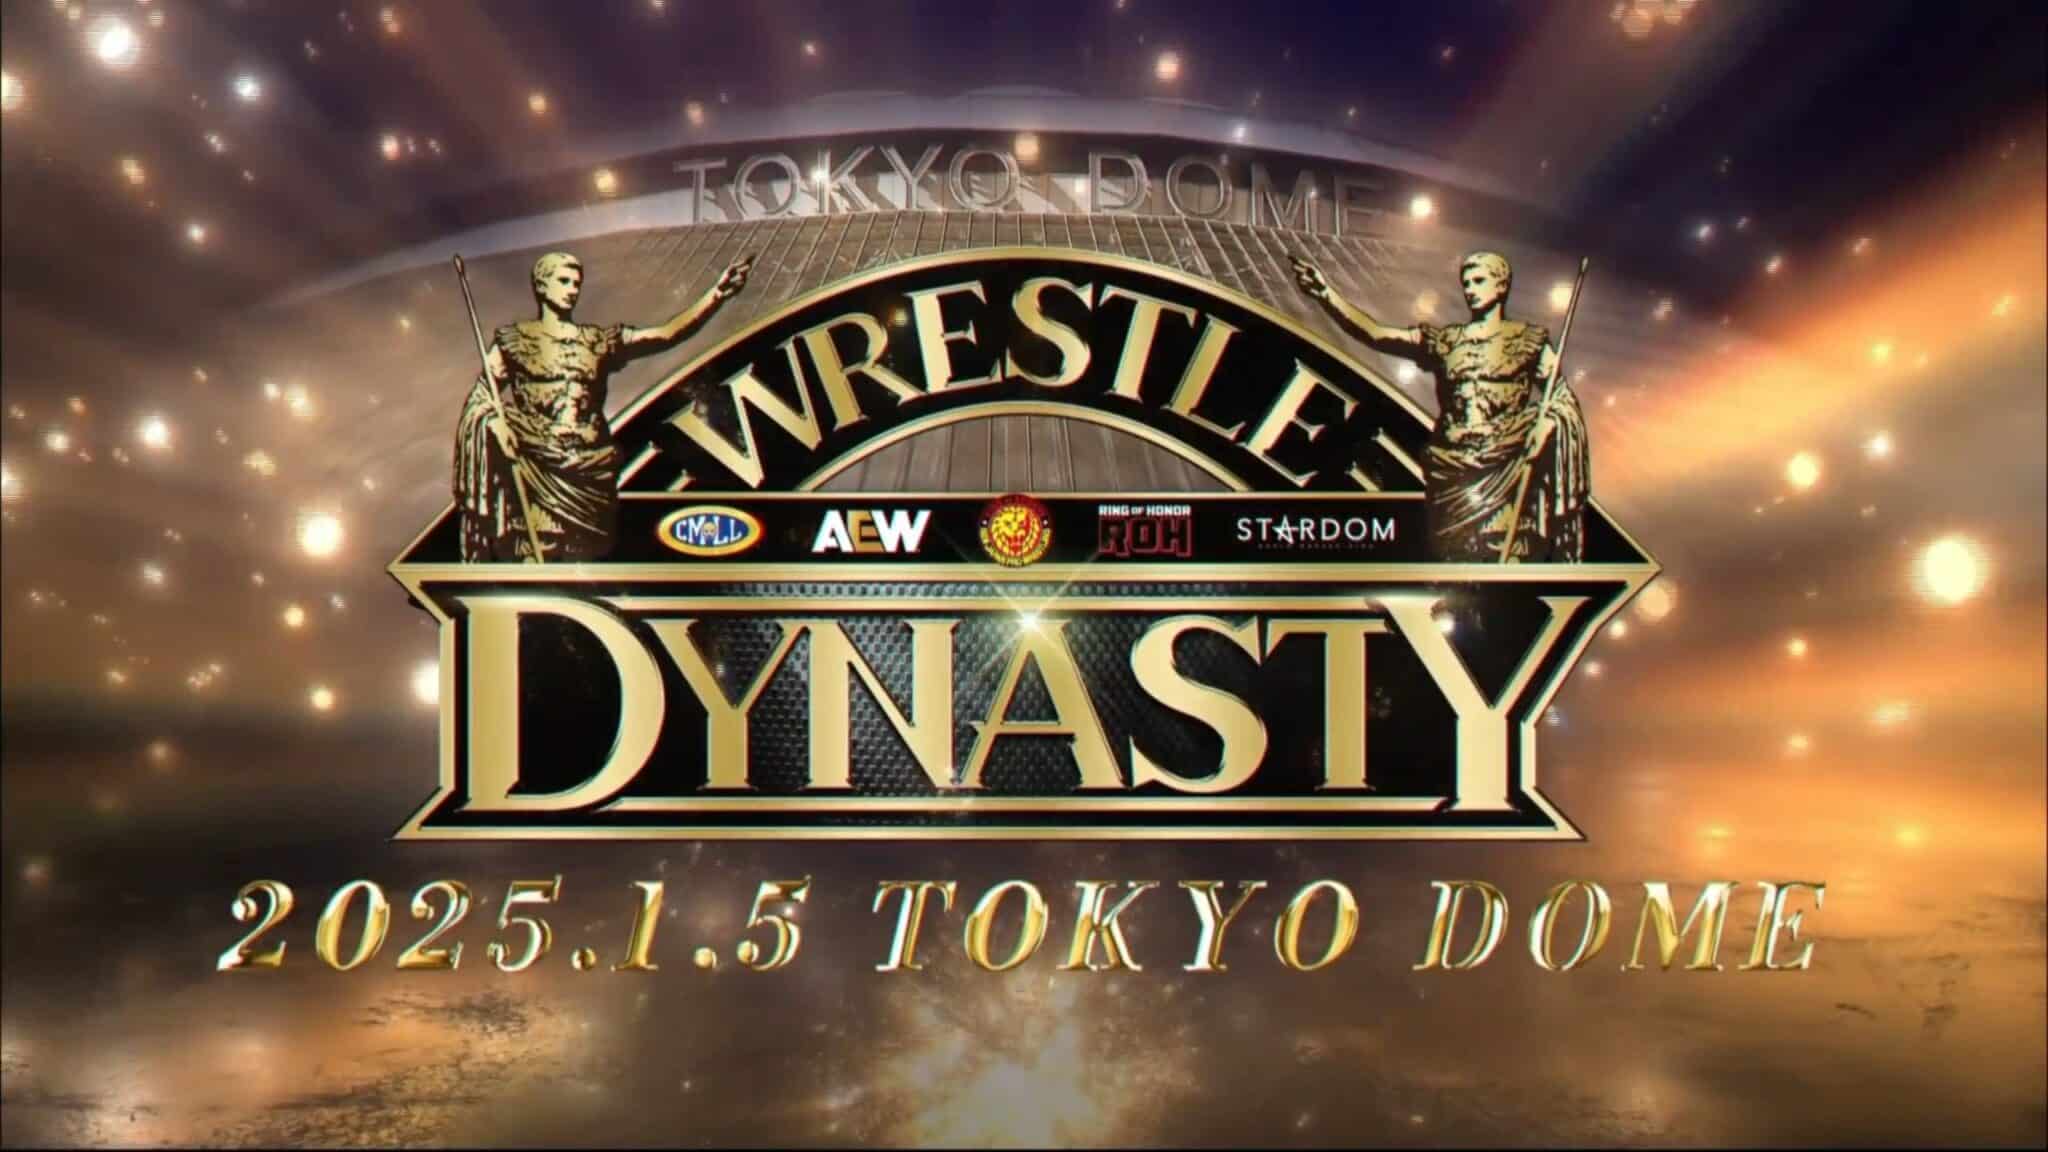 The Tokyo Dome is set to host the NJPW Wrestle Dynasty Crossover Event on January 5, 2025, as per the latest announcement.